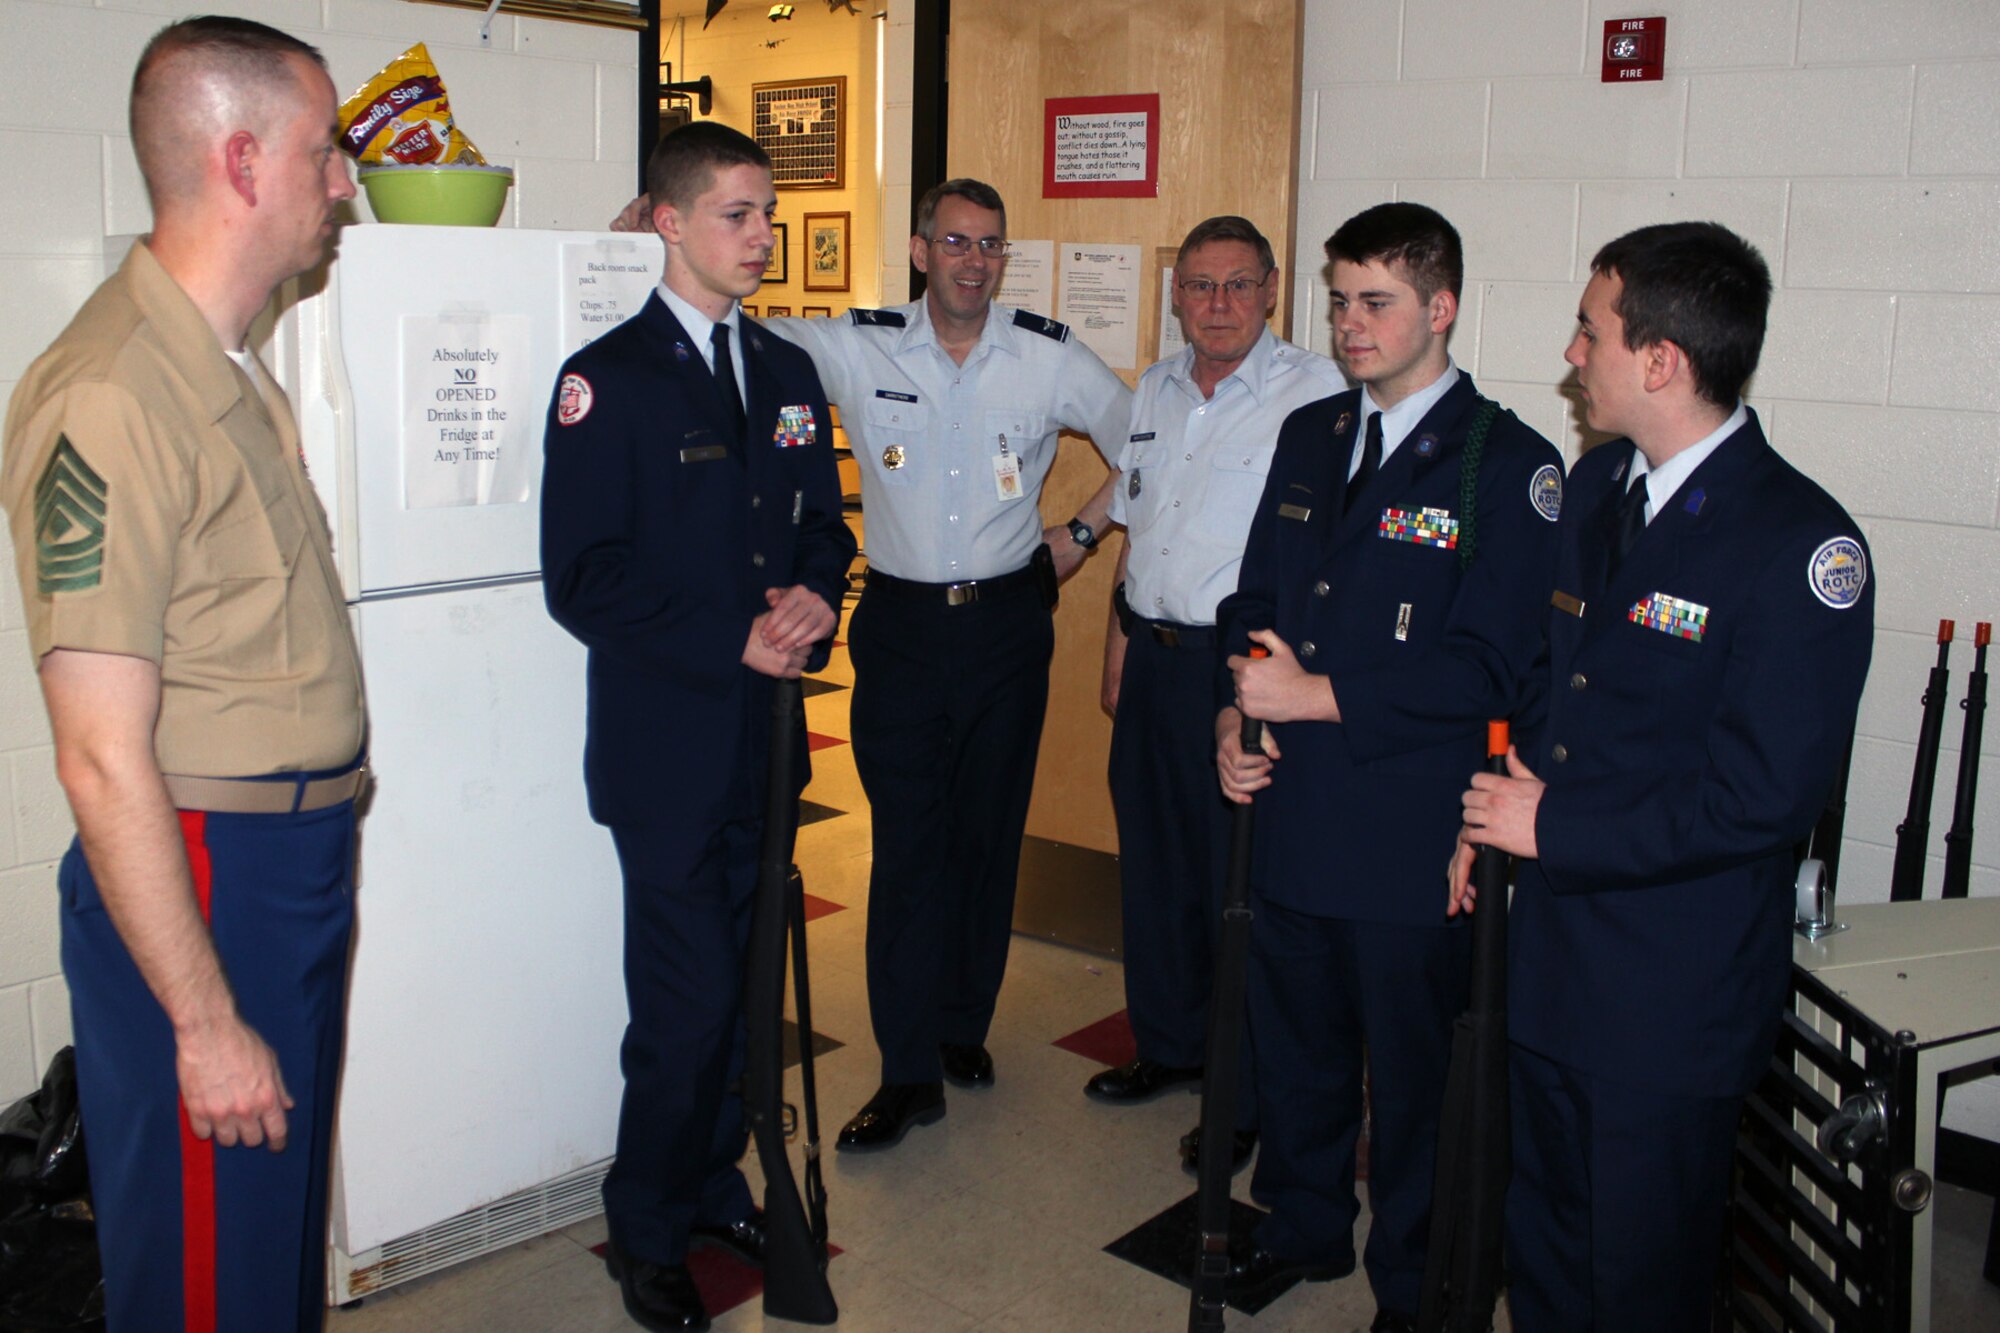 Marine Corps 1st Sgt. David Auwen talks with instructors and cadets of the Anchor Bay High School Air Force Junior ROTC program at the high school, near New Baltimore, Mich, April 24, 2013. Auwen was the first cadet commander of the program when it was re-established in the early 1990s. Today, he is the headquarters first sergeant for the 1st Battalion, 24th Marine Regiment, based at nearby Selfridge Air National Guard Base. With Auwen are Cadet Austin Parks, Col. (retired) Jeffrey Carrothers, Master Sgt. (retired) Steve Wratchford, and Cadets Johnathon LaFave and Tristan Grose. Carrothers and Wratchford are the aerospace science instructors at the high school. (U.S. Air National Guard photo by TSgt. Dan Heaton)